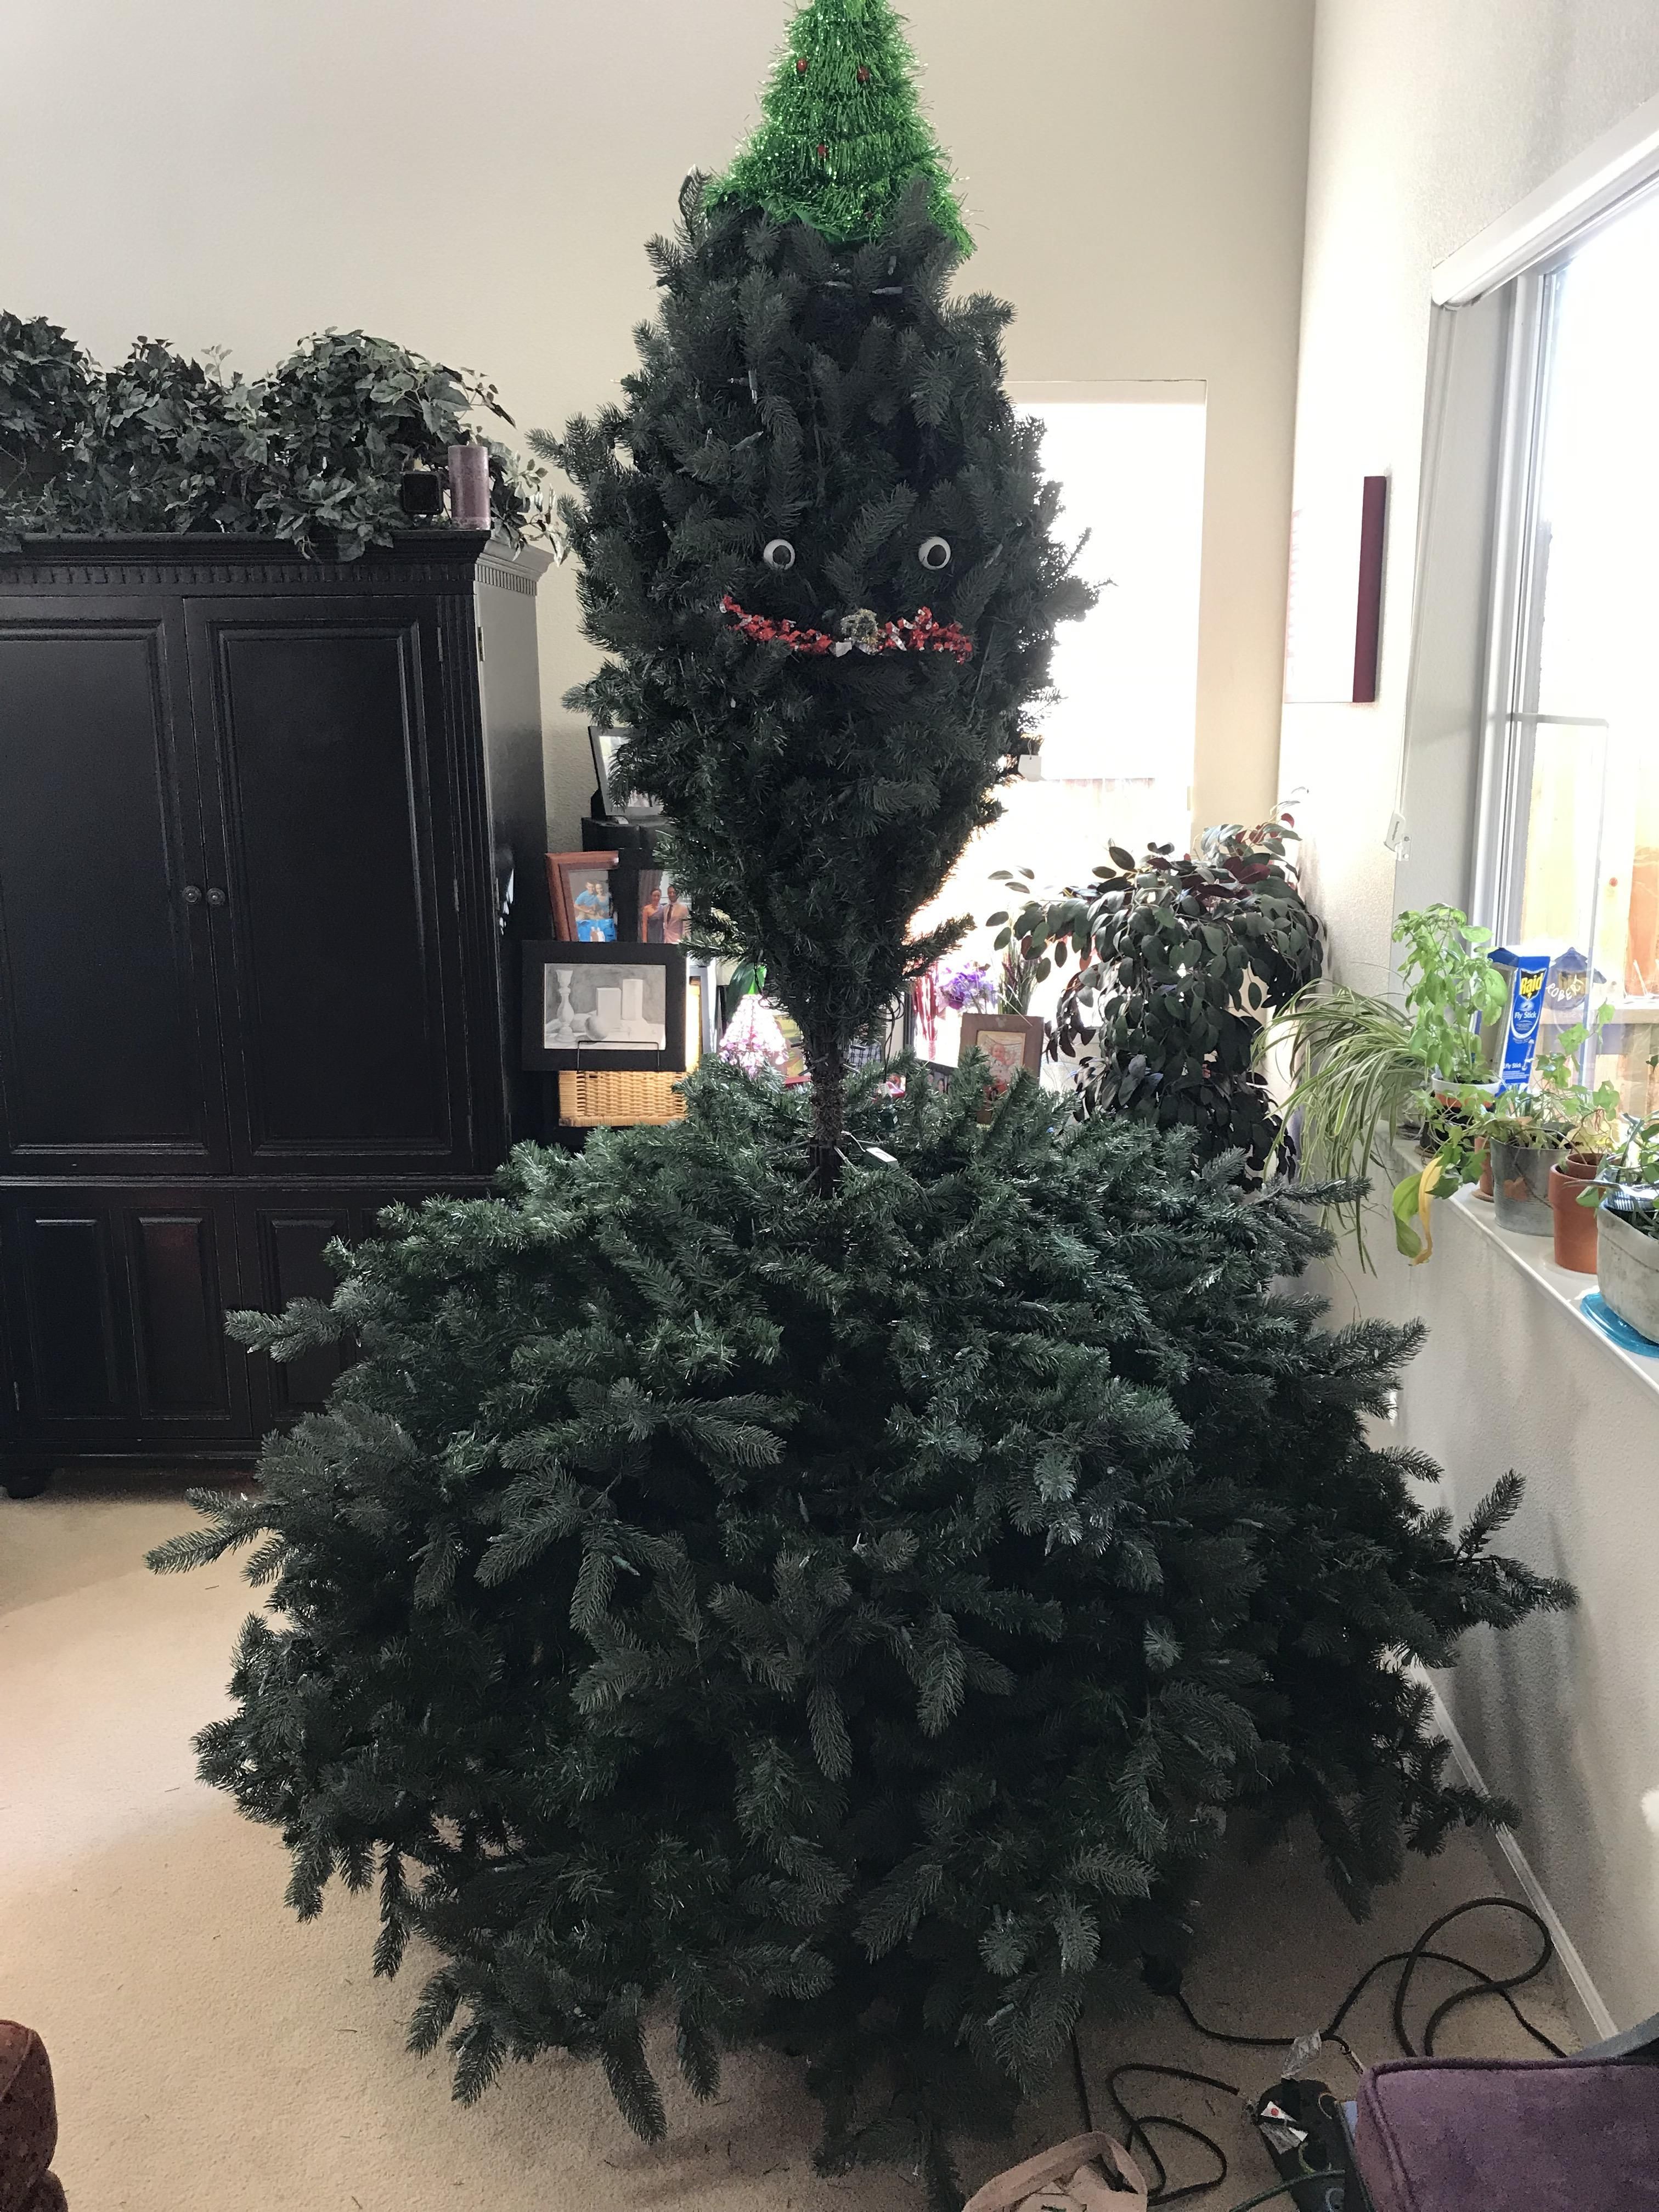 We didn’t want to set up the second half of the tree. So we got creative. Meet treevor